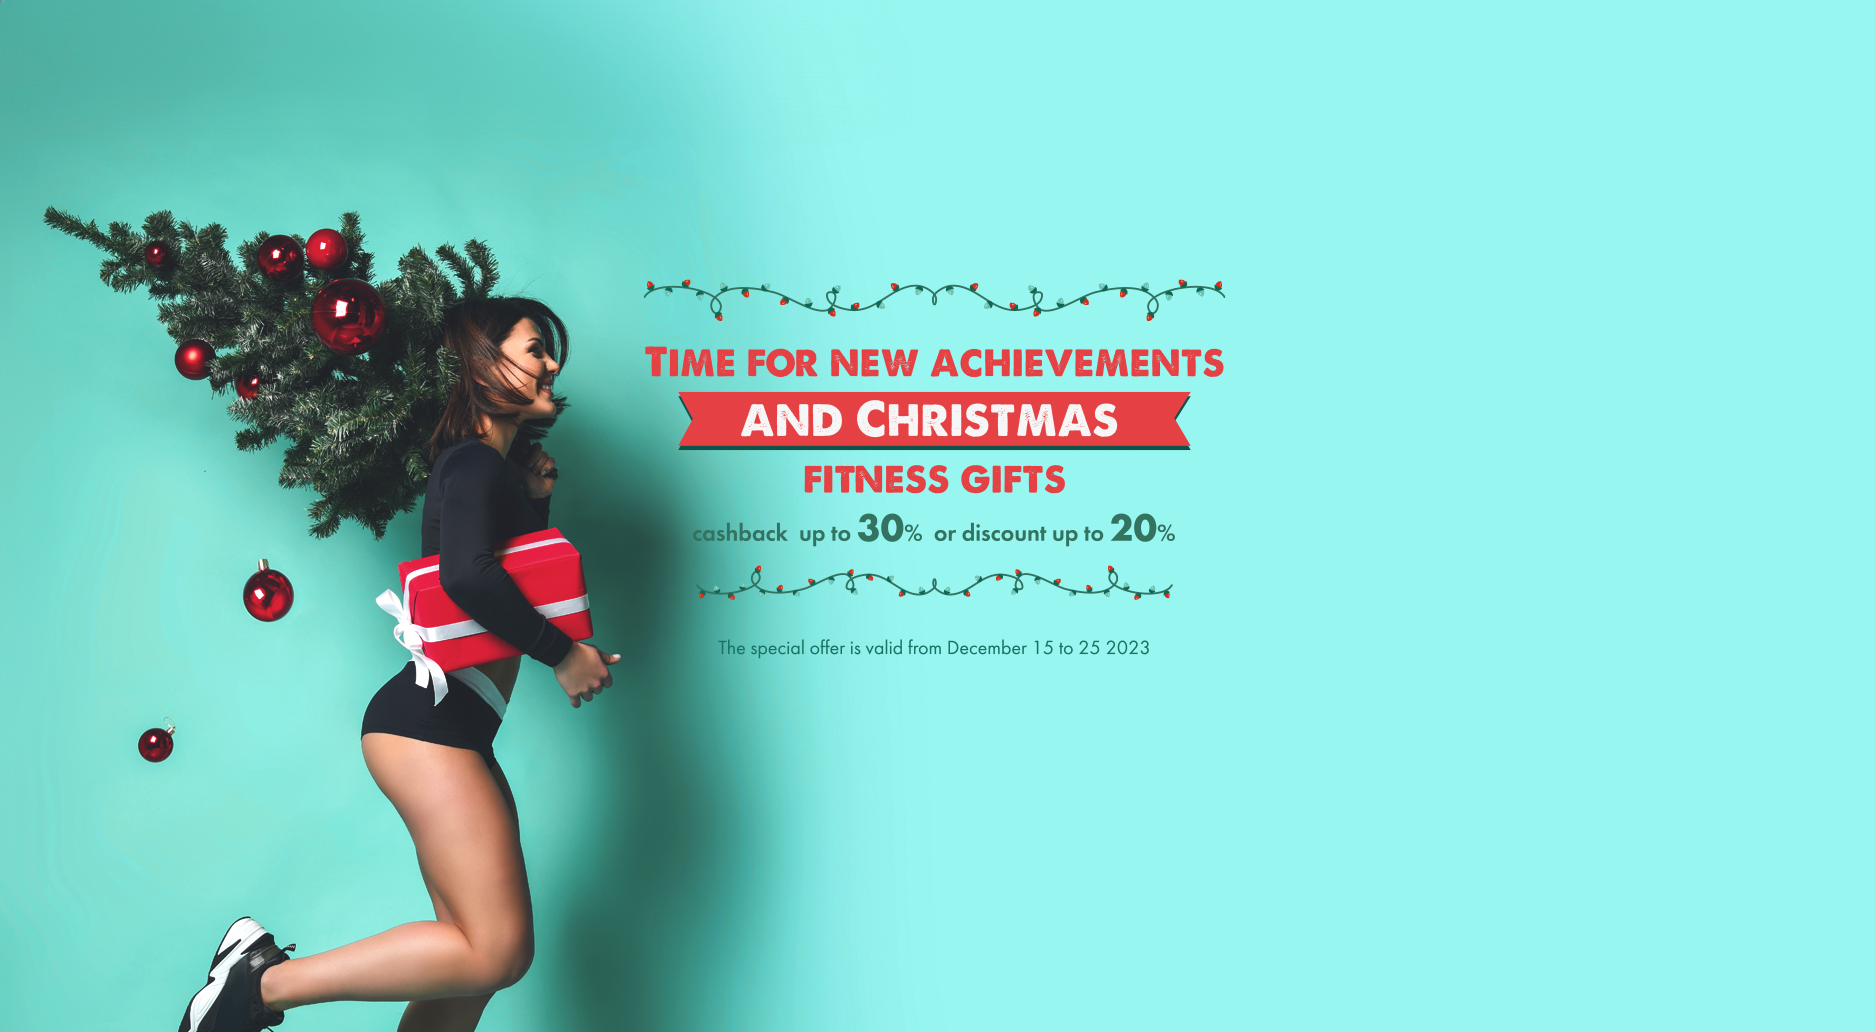 Time for new achievements and Christmas fitness gifts!